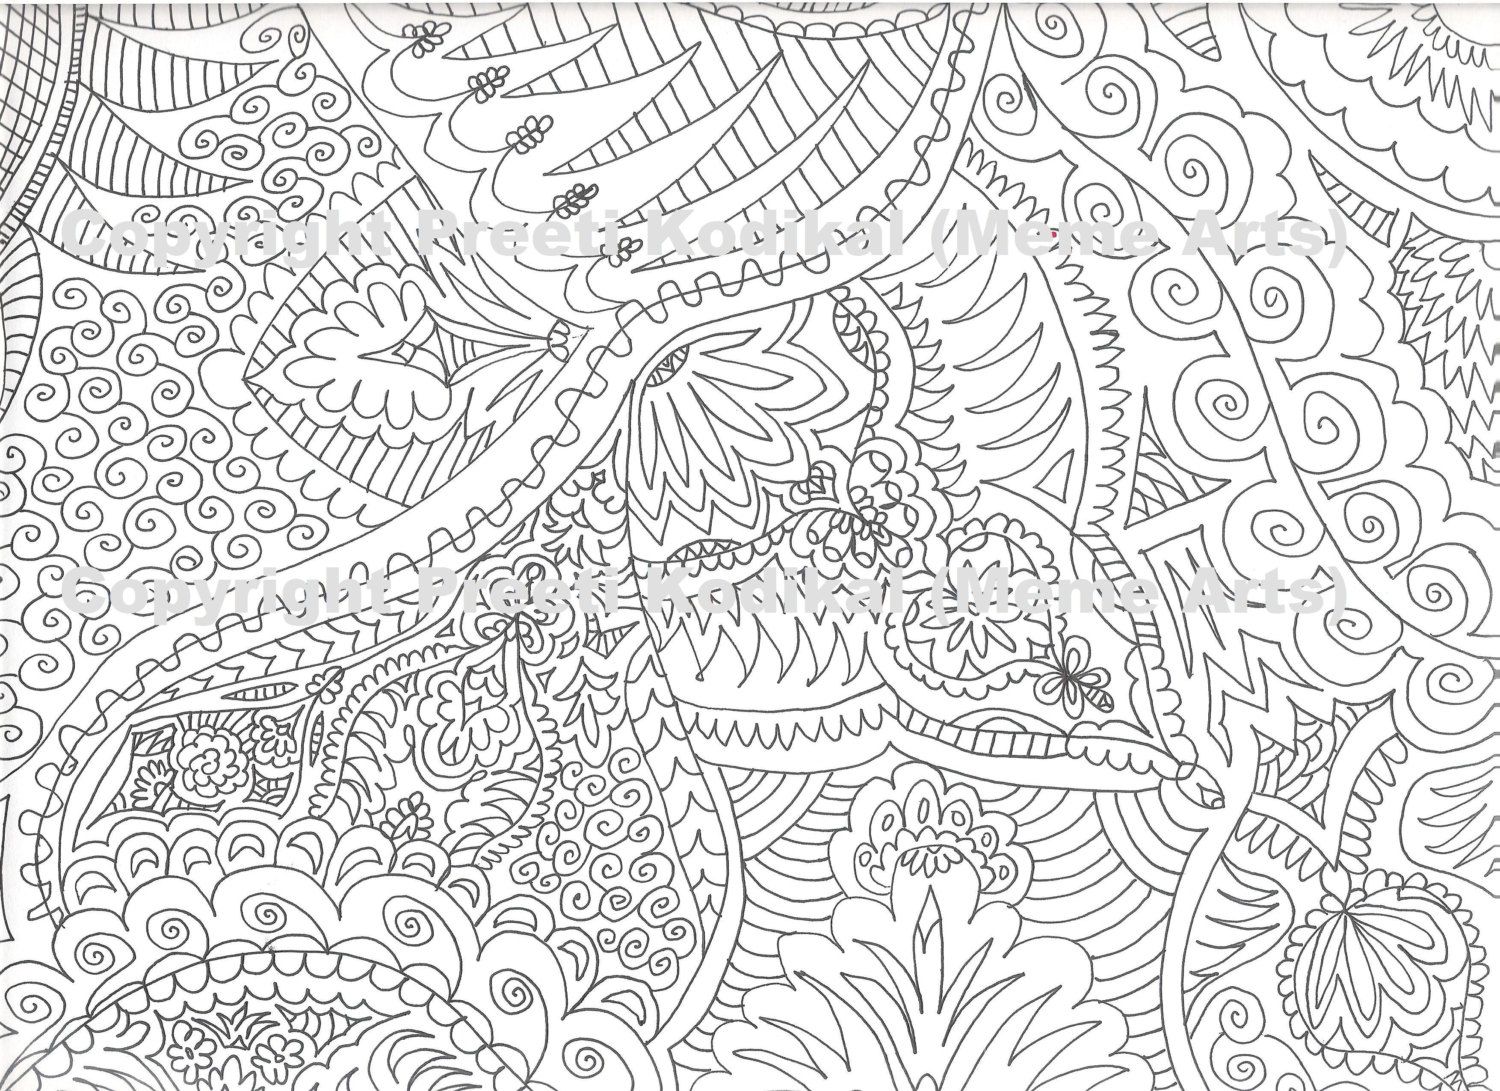 Art Hard Coloring Pages - Coloring Pages For All Ages